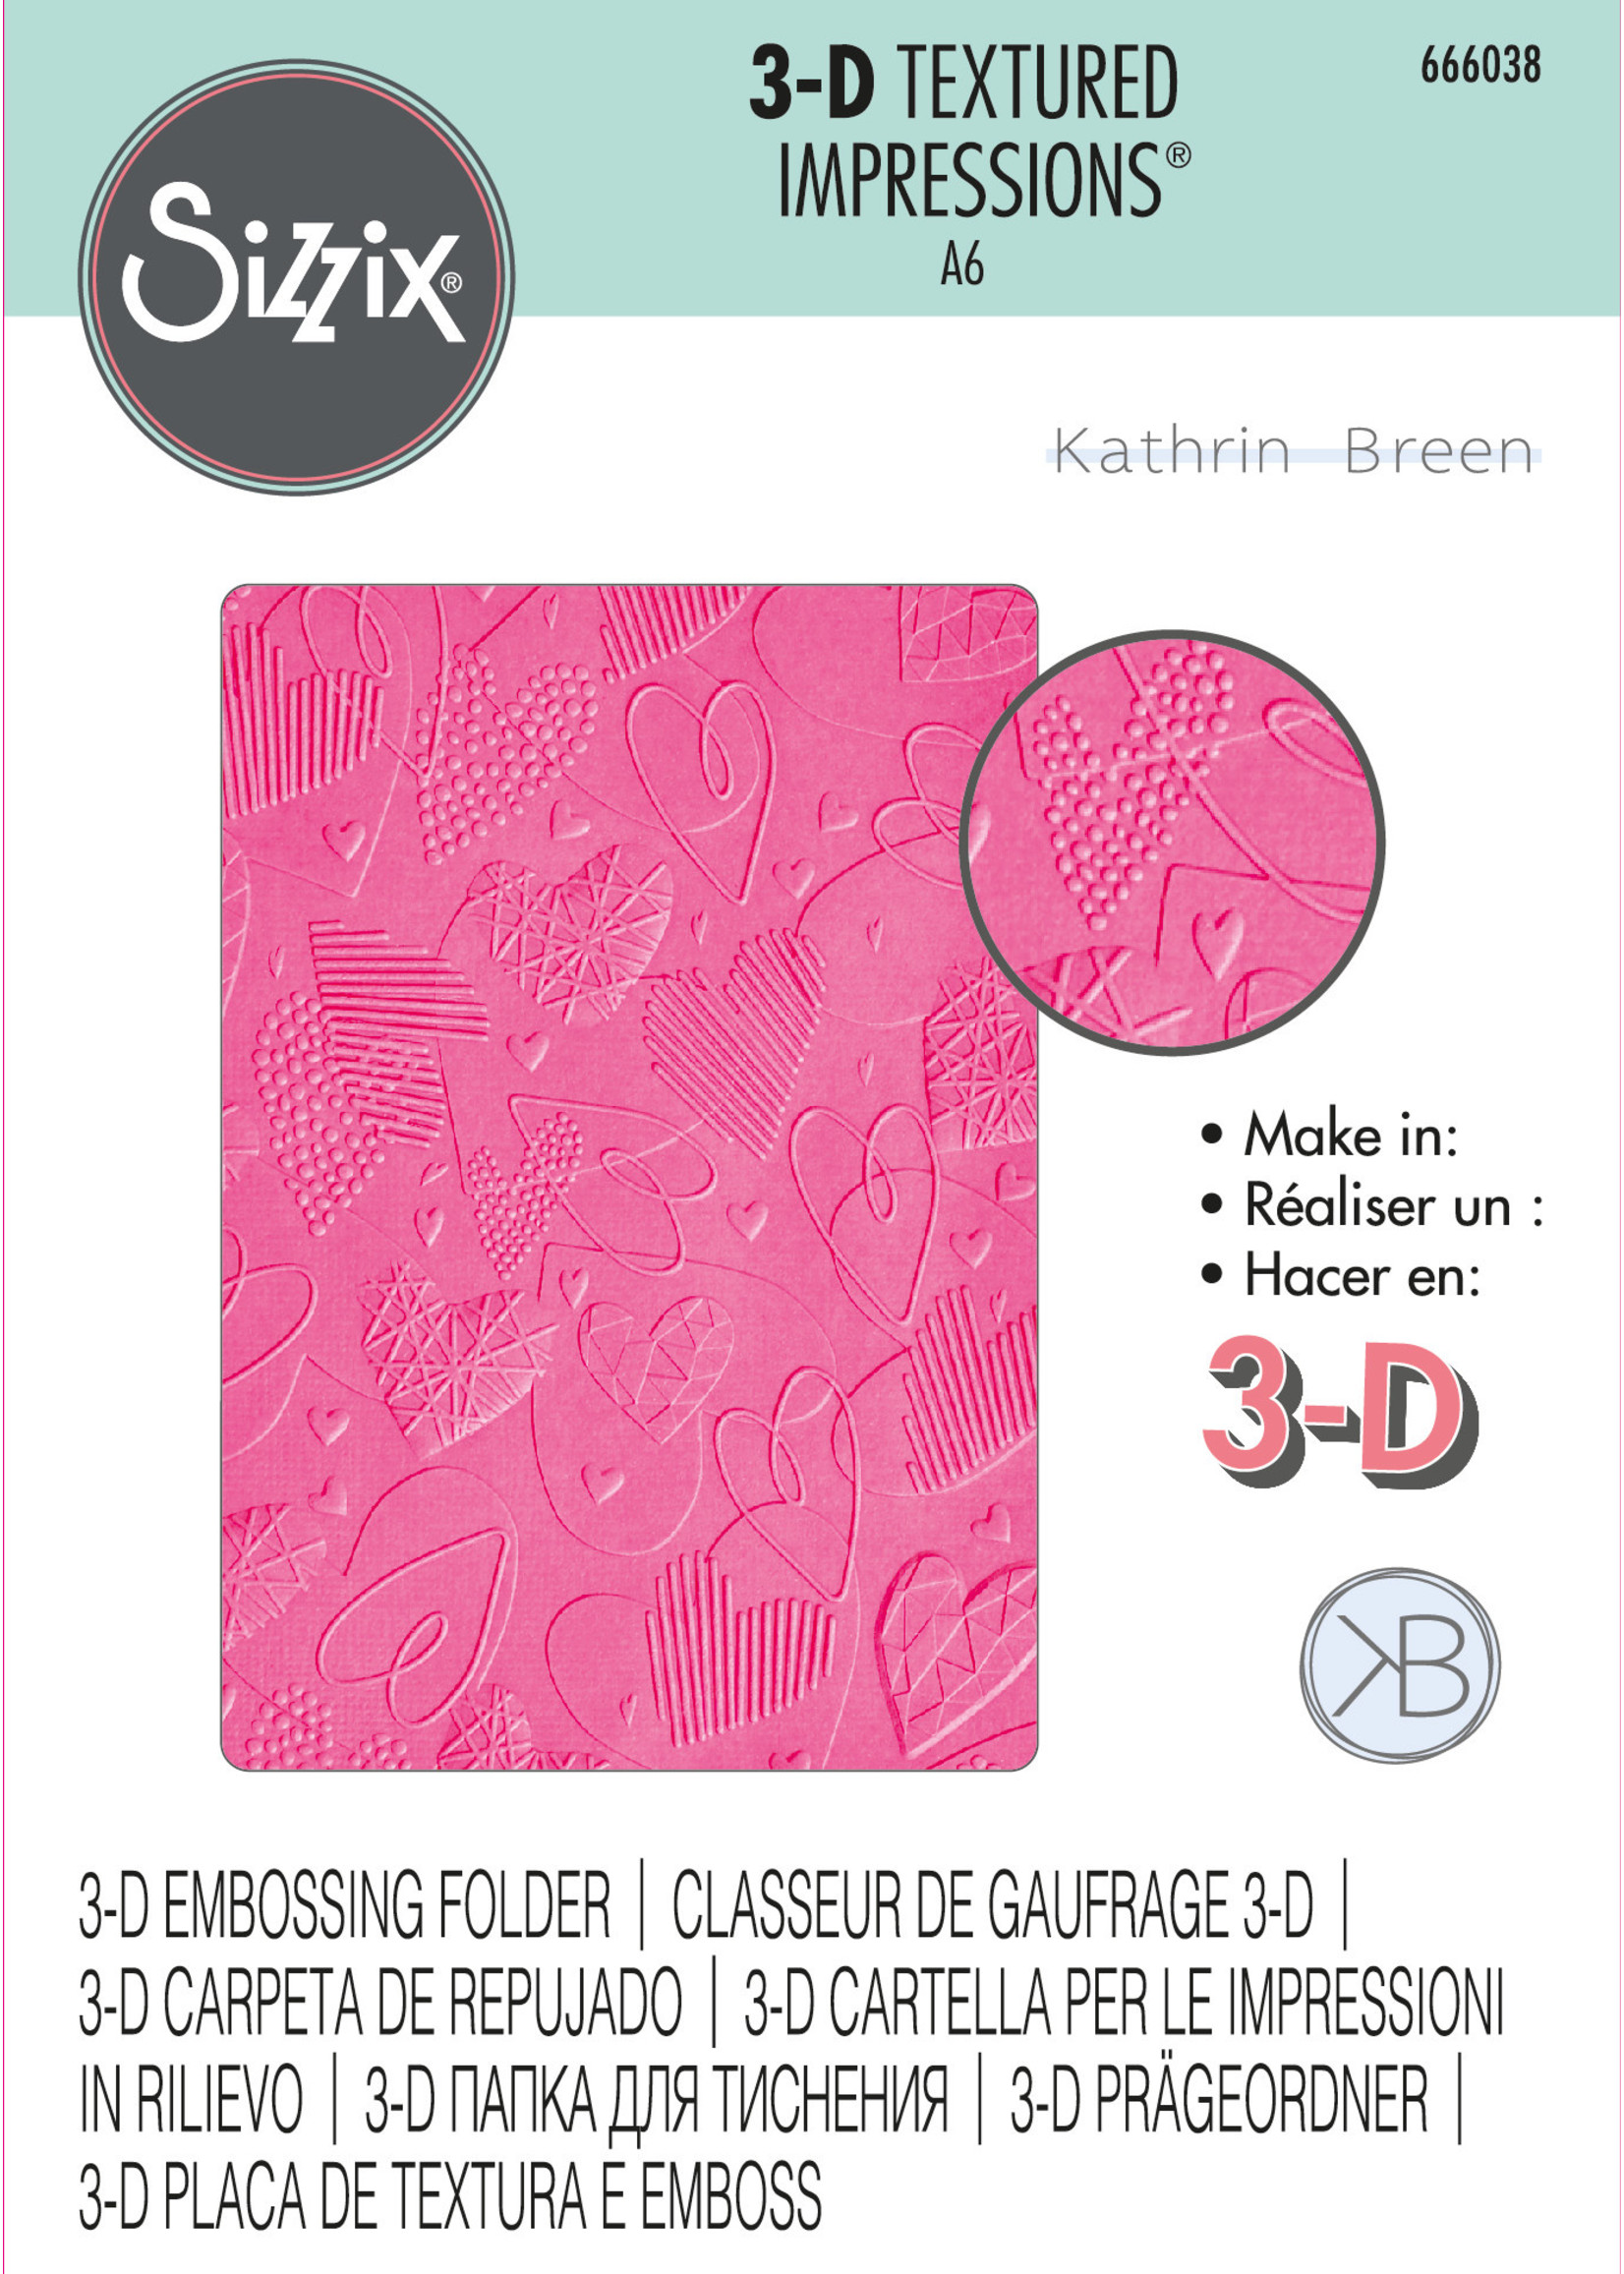 Sizzix Sizzix® 3-D Textured Impressions® Embossing Folder - Mark Making Hearts by Kath Breen